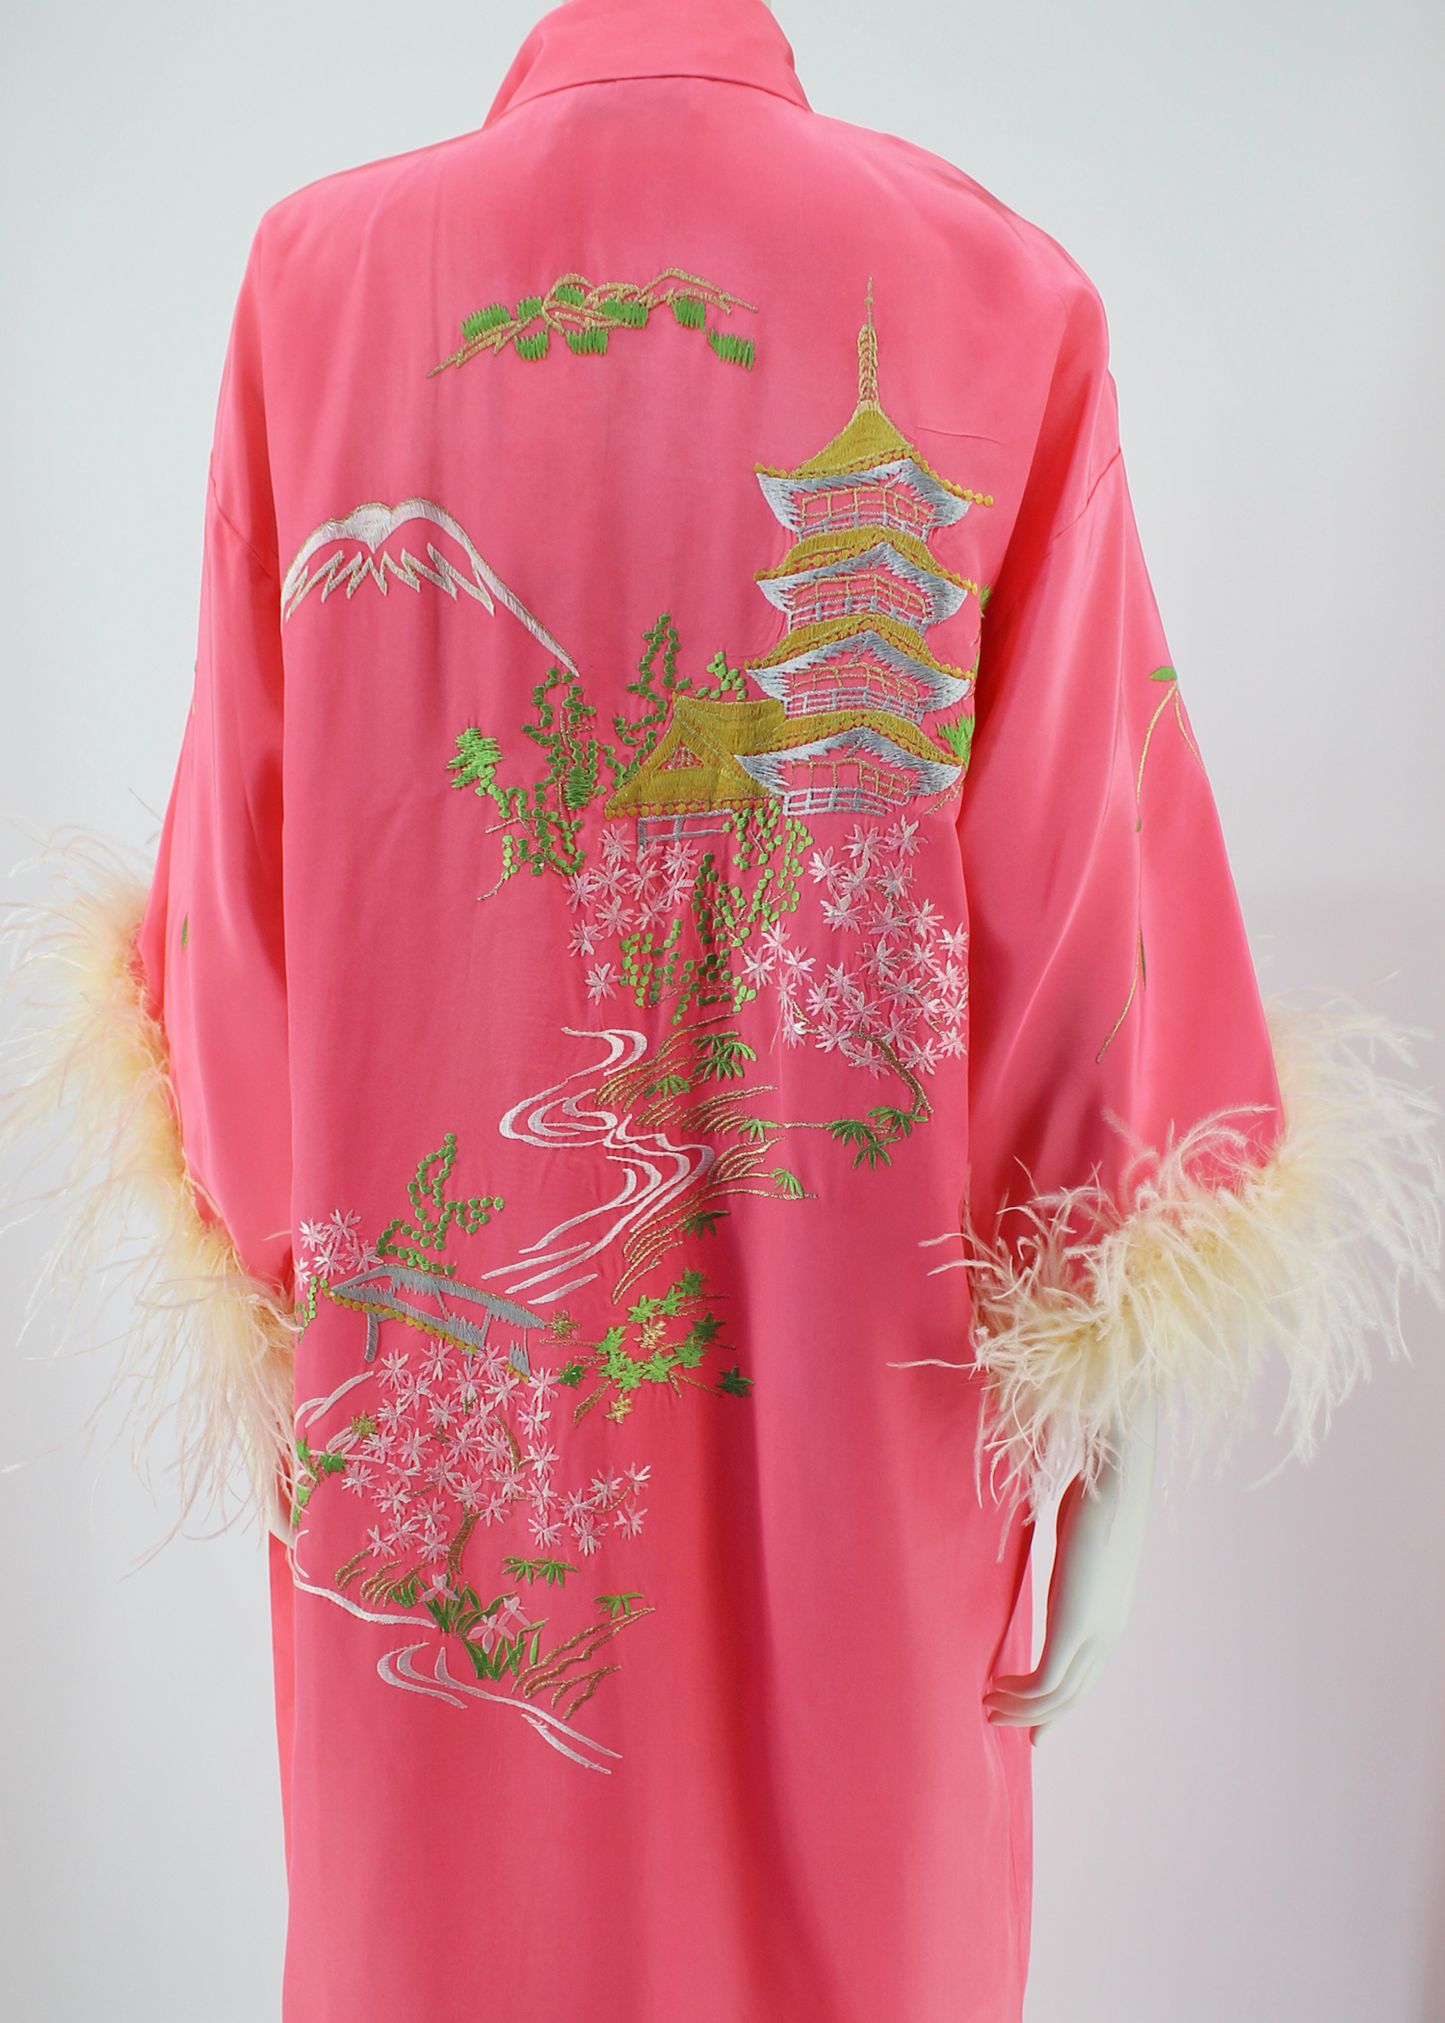 Dauphinette 1960s Pink Hand-Embroidered Robe with Feathers